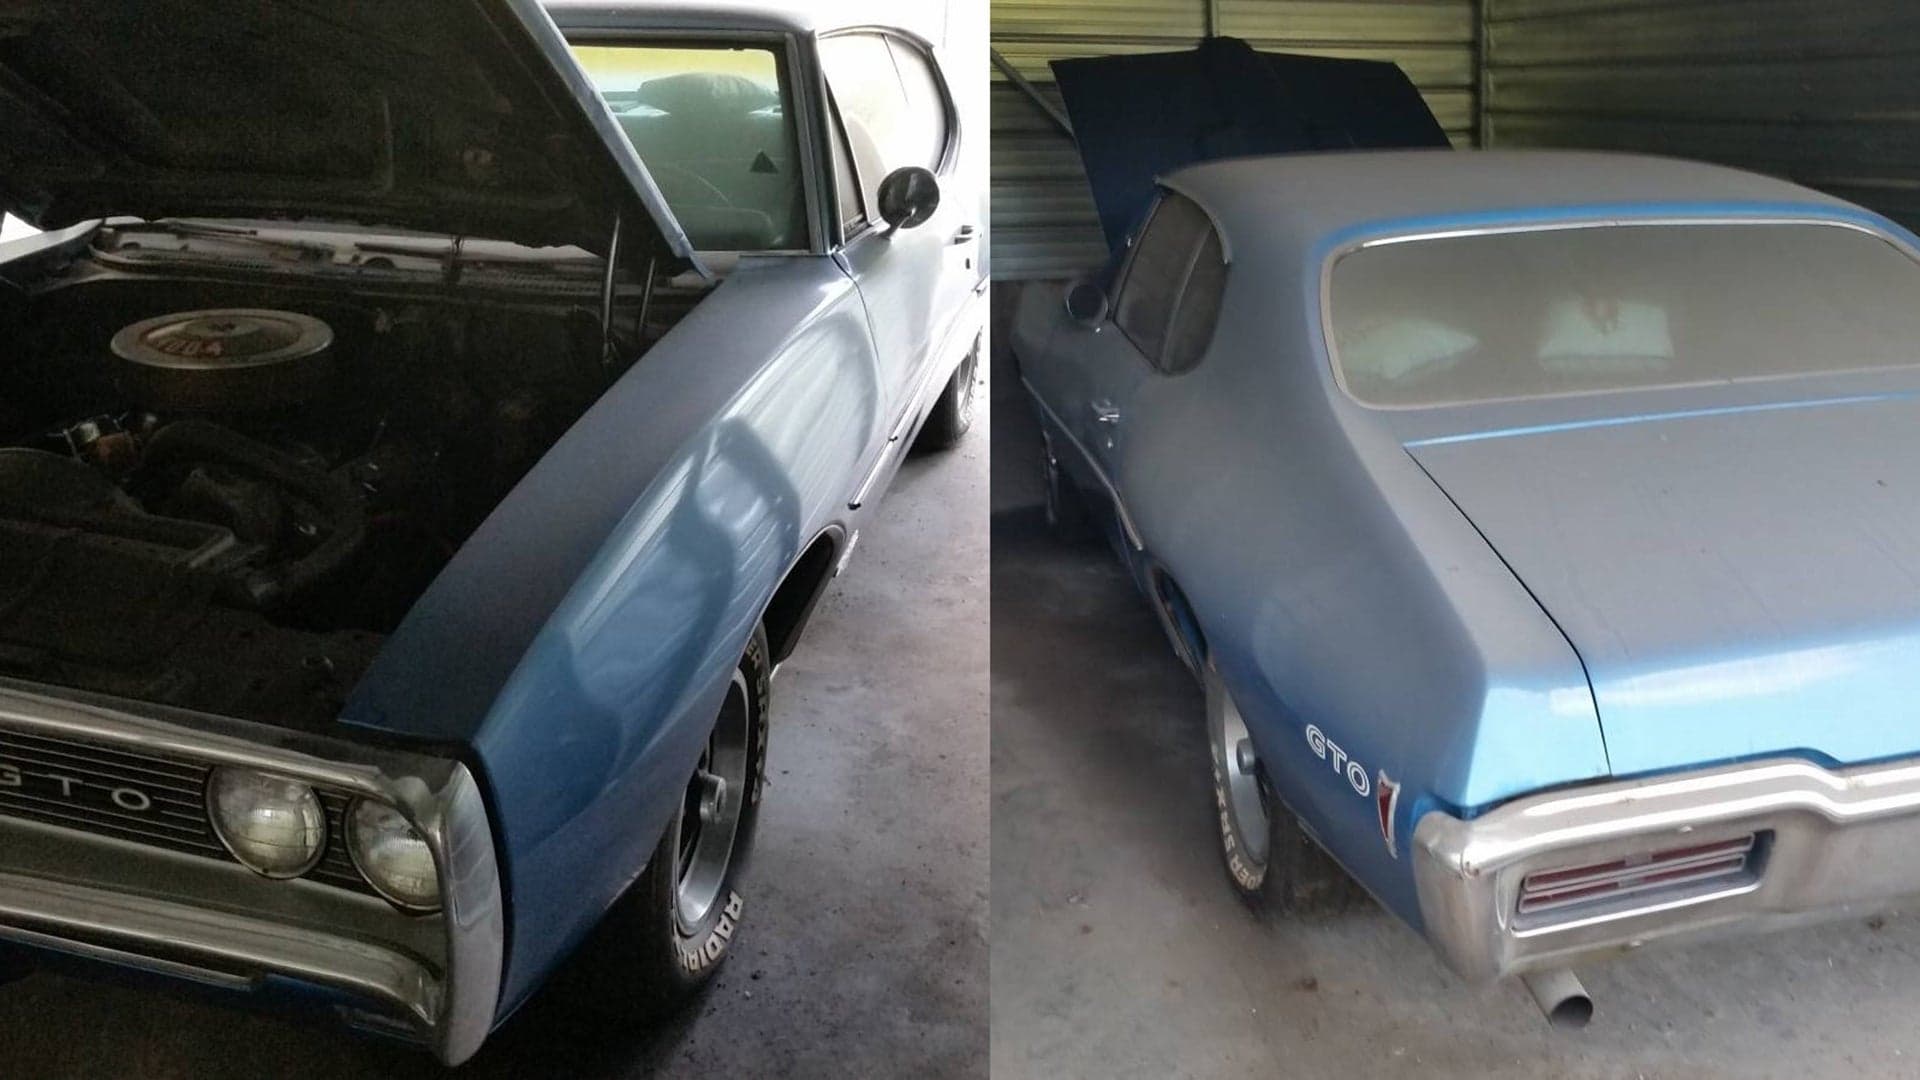 This $15,500 1968 Pontiac GTO Barn Find Might Be a Real One-Of-A-Kind Unicorn